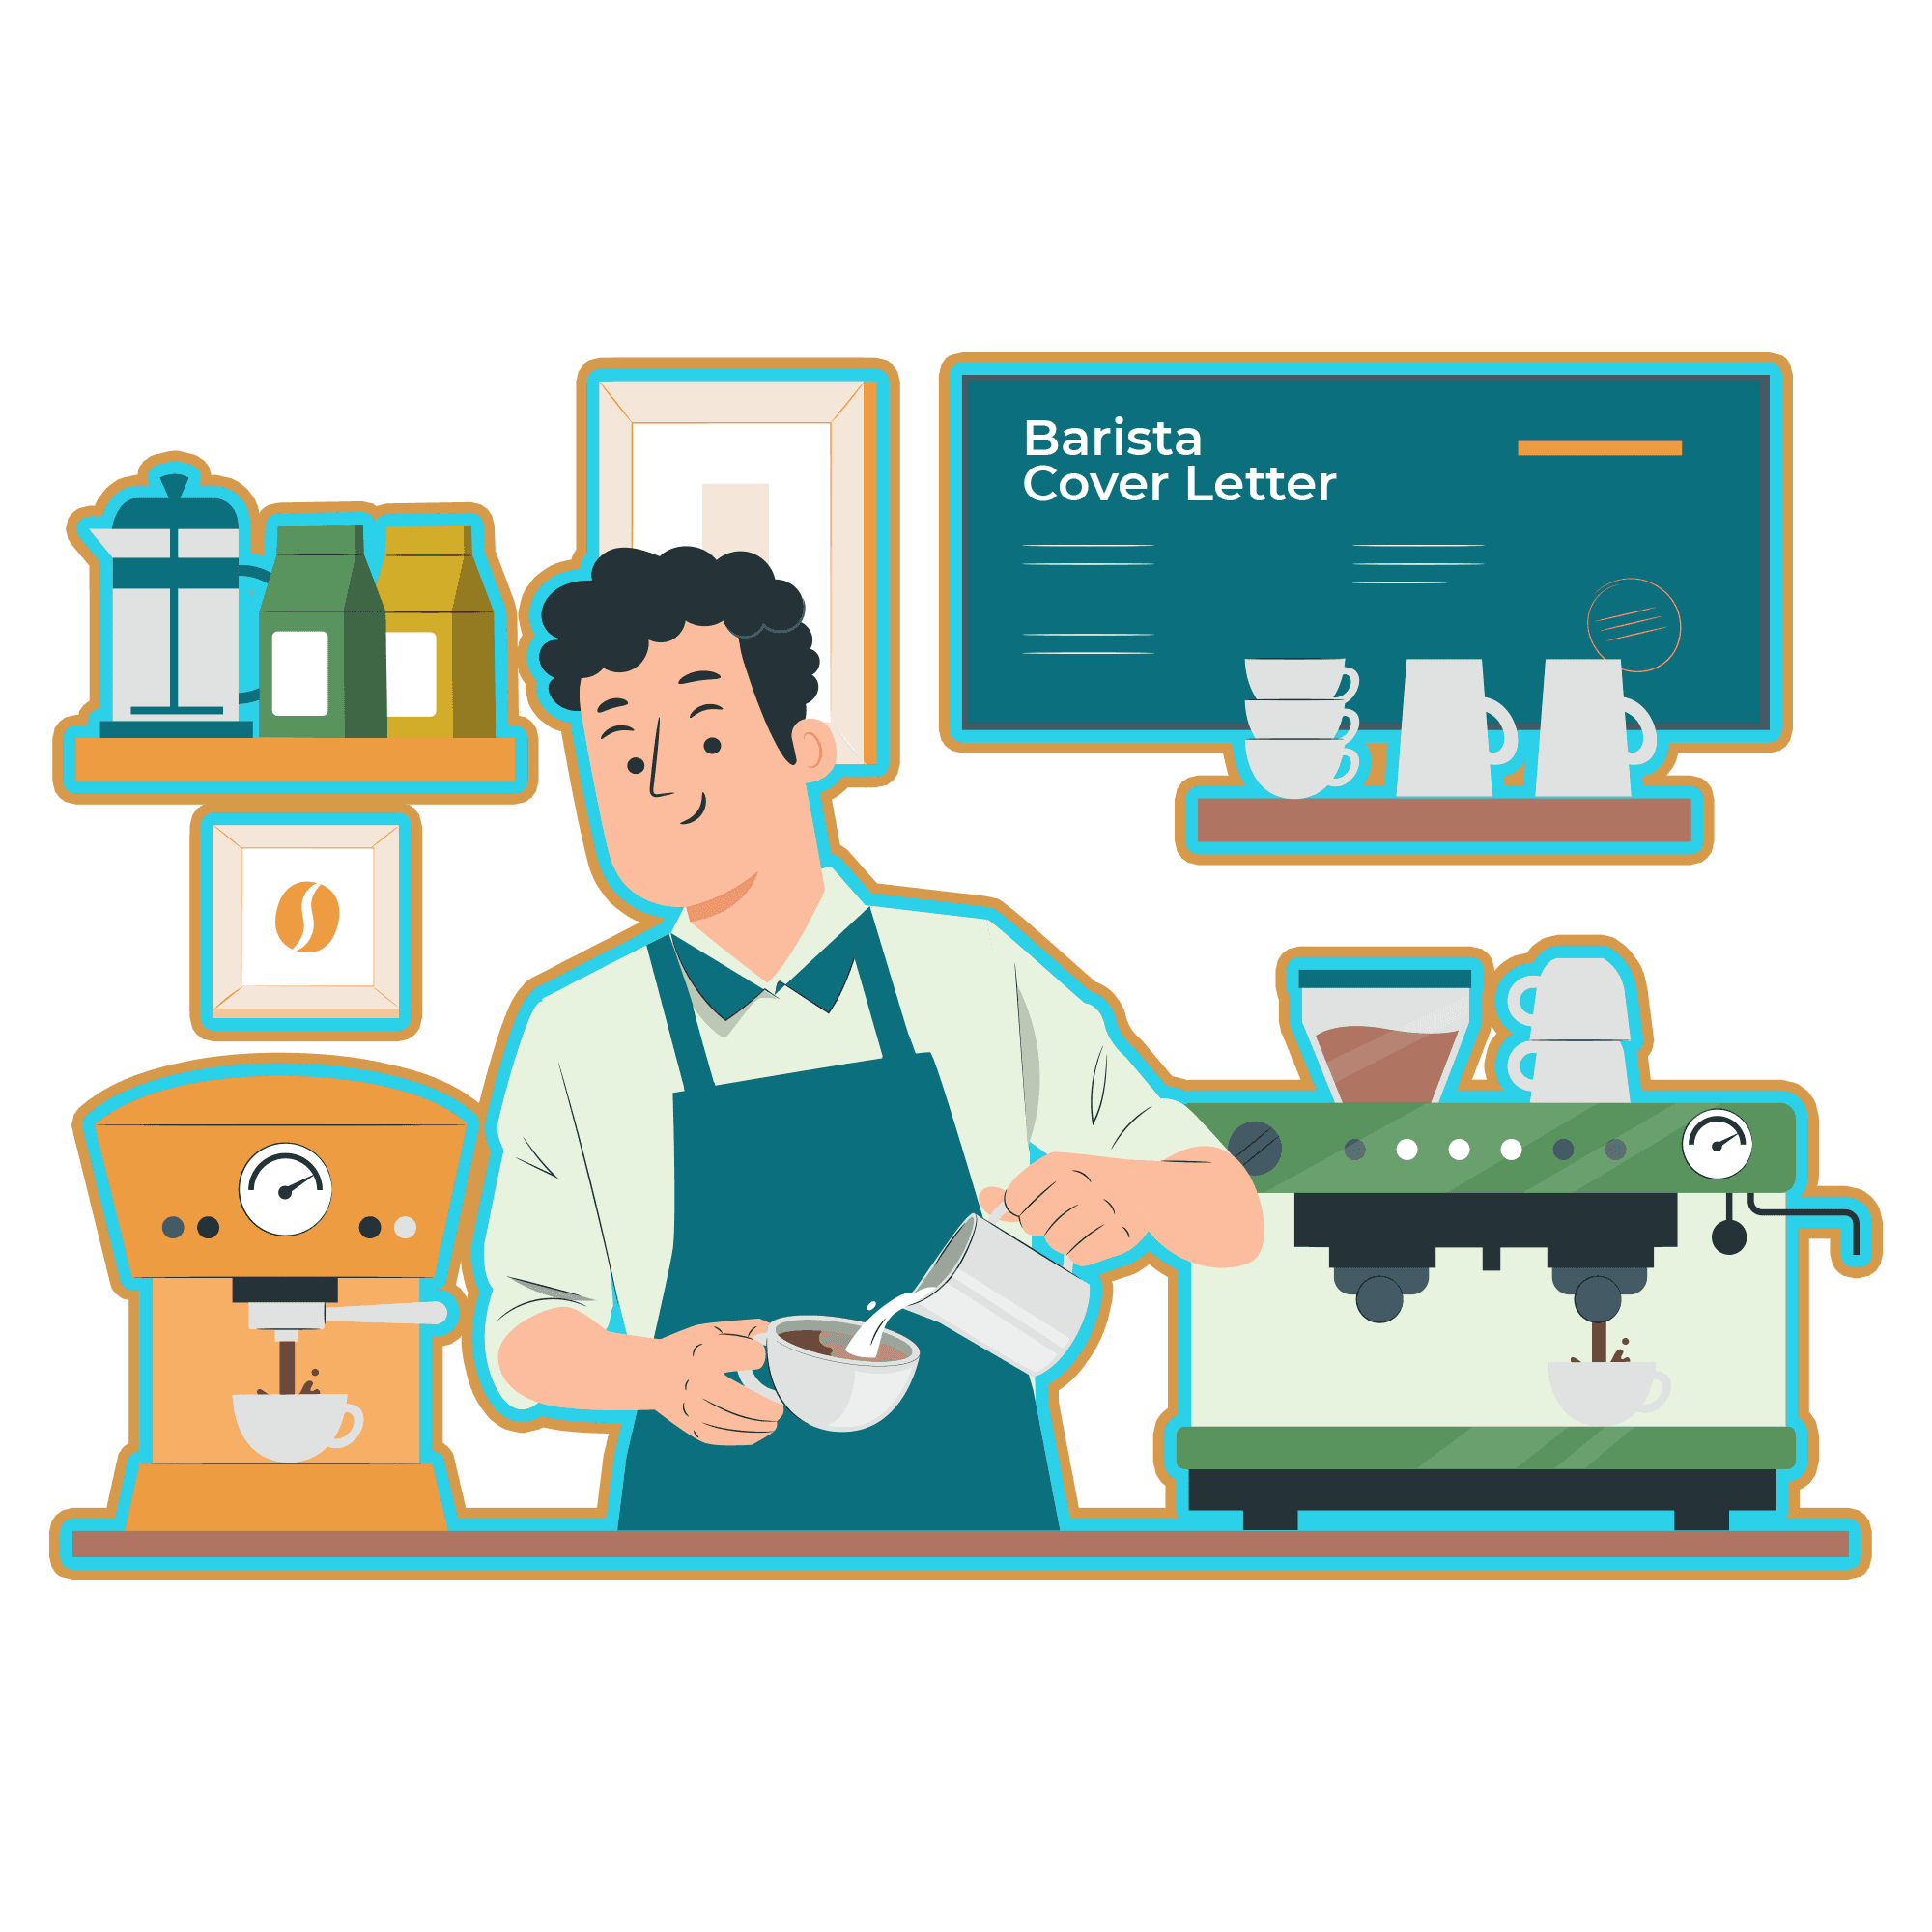 Barista Cover Letter: Examples, Templates, Writing Tips